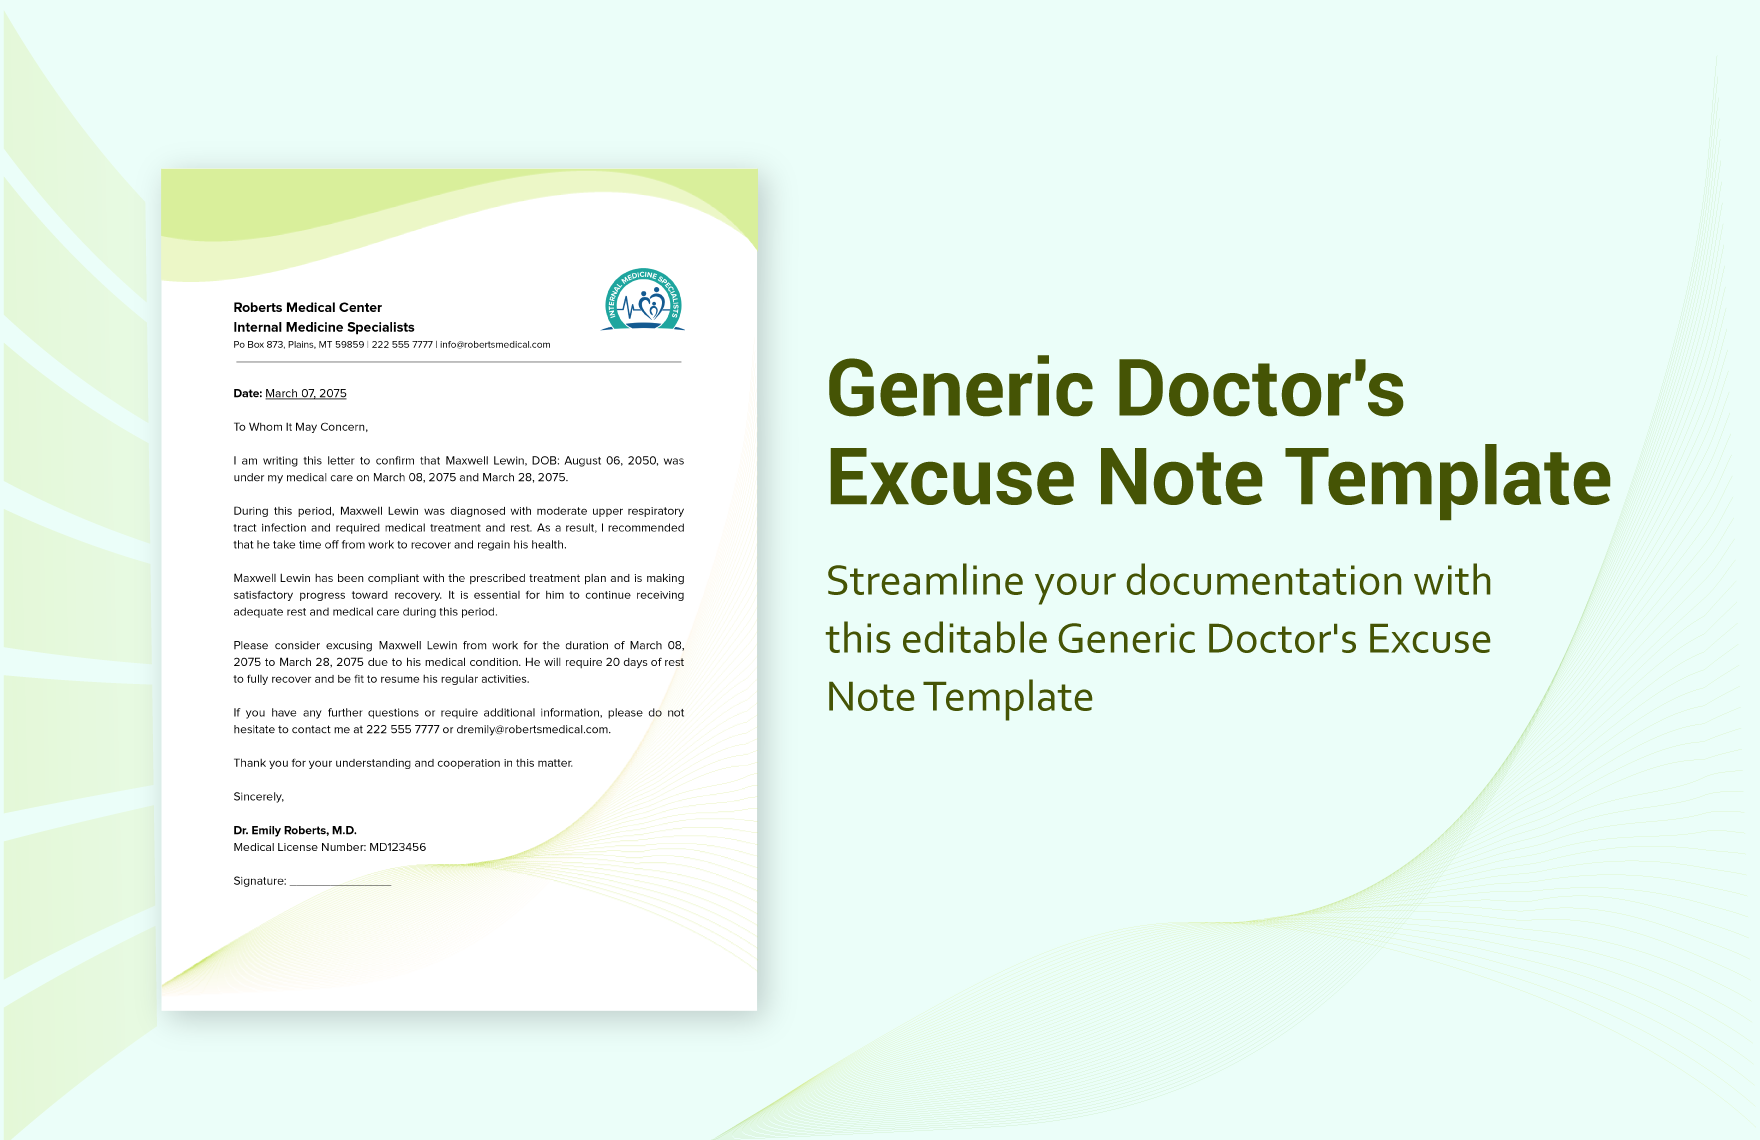 Generic Doctor's Excuse Note Template